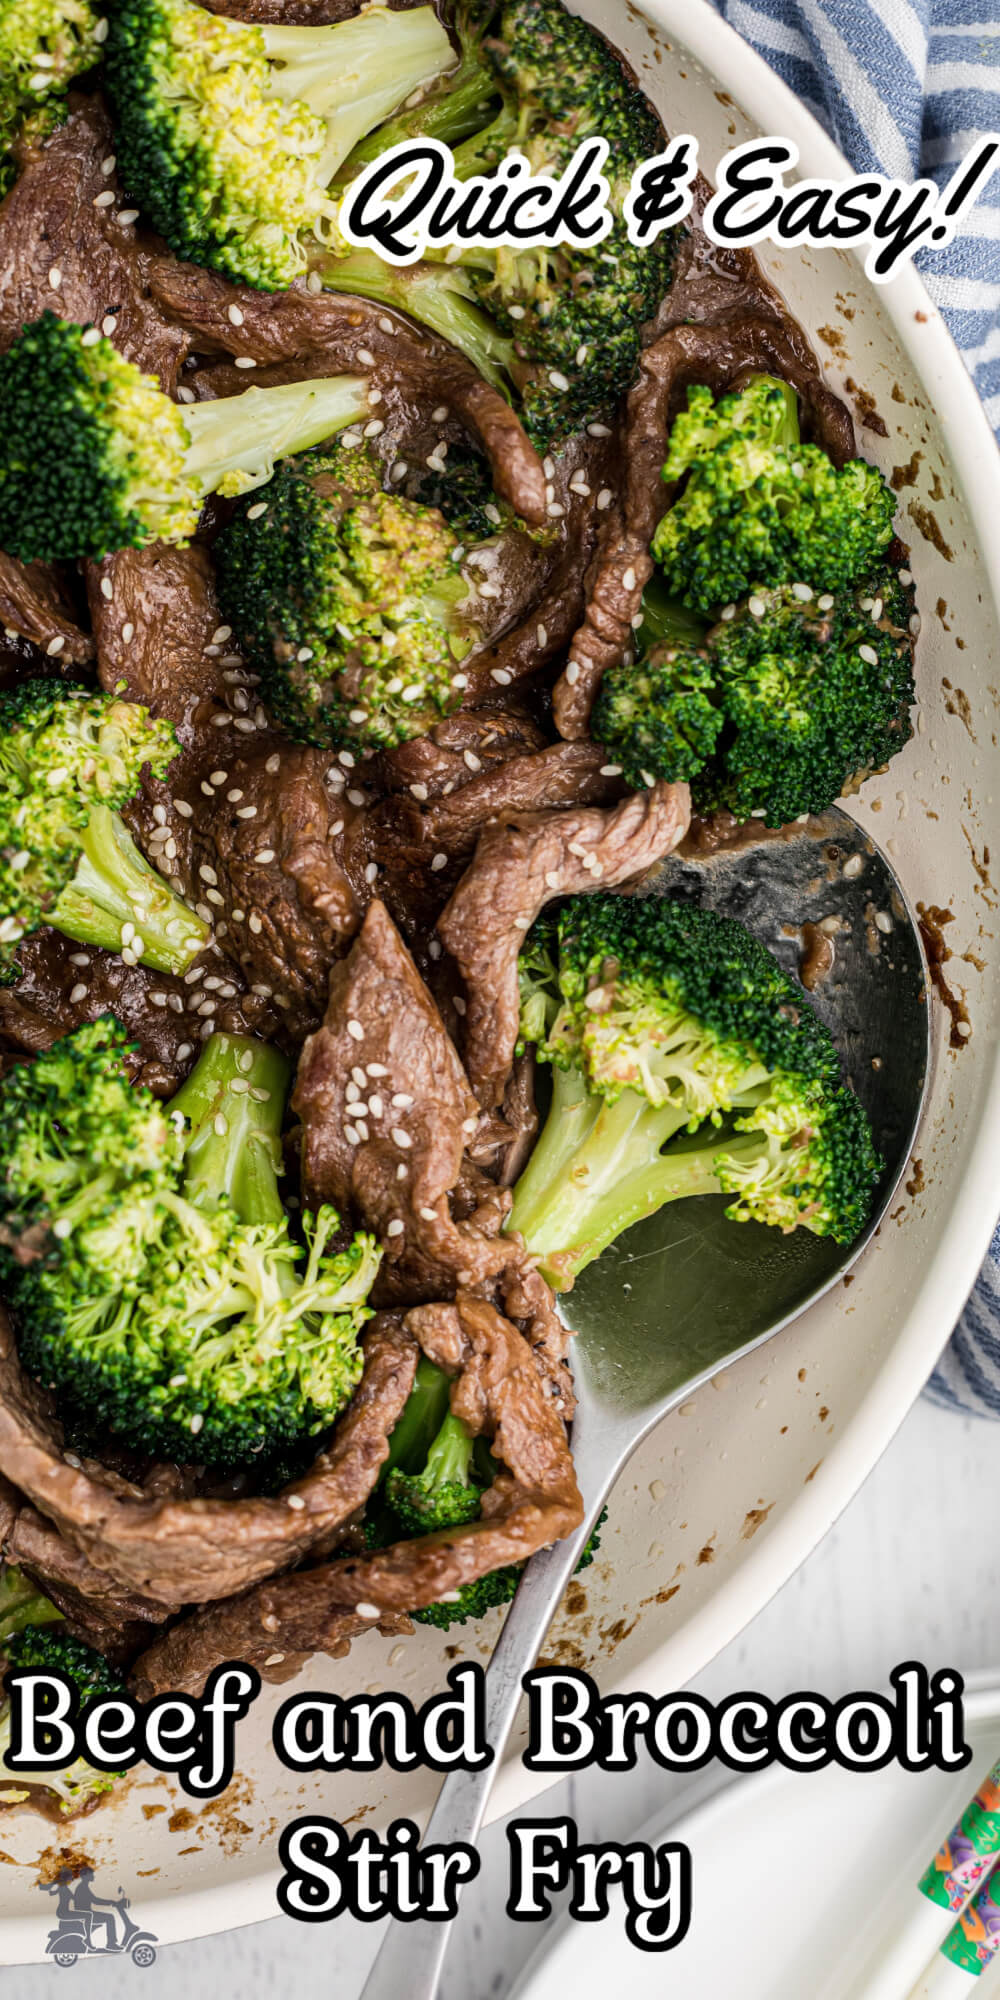 This Quick and Easy Chinese Beef and Broccoli Stir Fry is better than in a restaurant. The Stir fry sauce is perfectly seasoned with ginger, garlic, and soy. This is a 30 minute dinner that your family will love. Serve it with rice or noodles and you have a complete weeknight dinner dish the family will eagerly eat and enjoy.